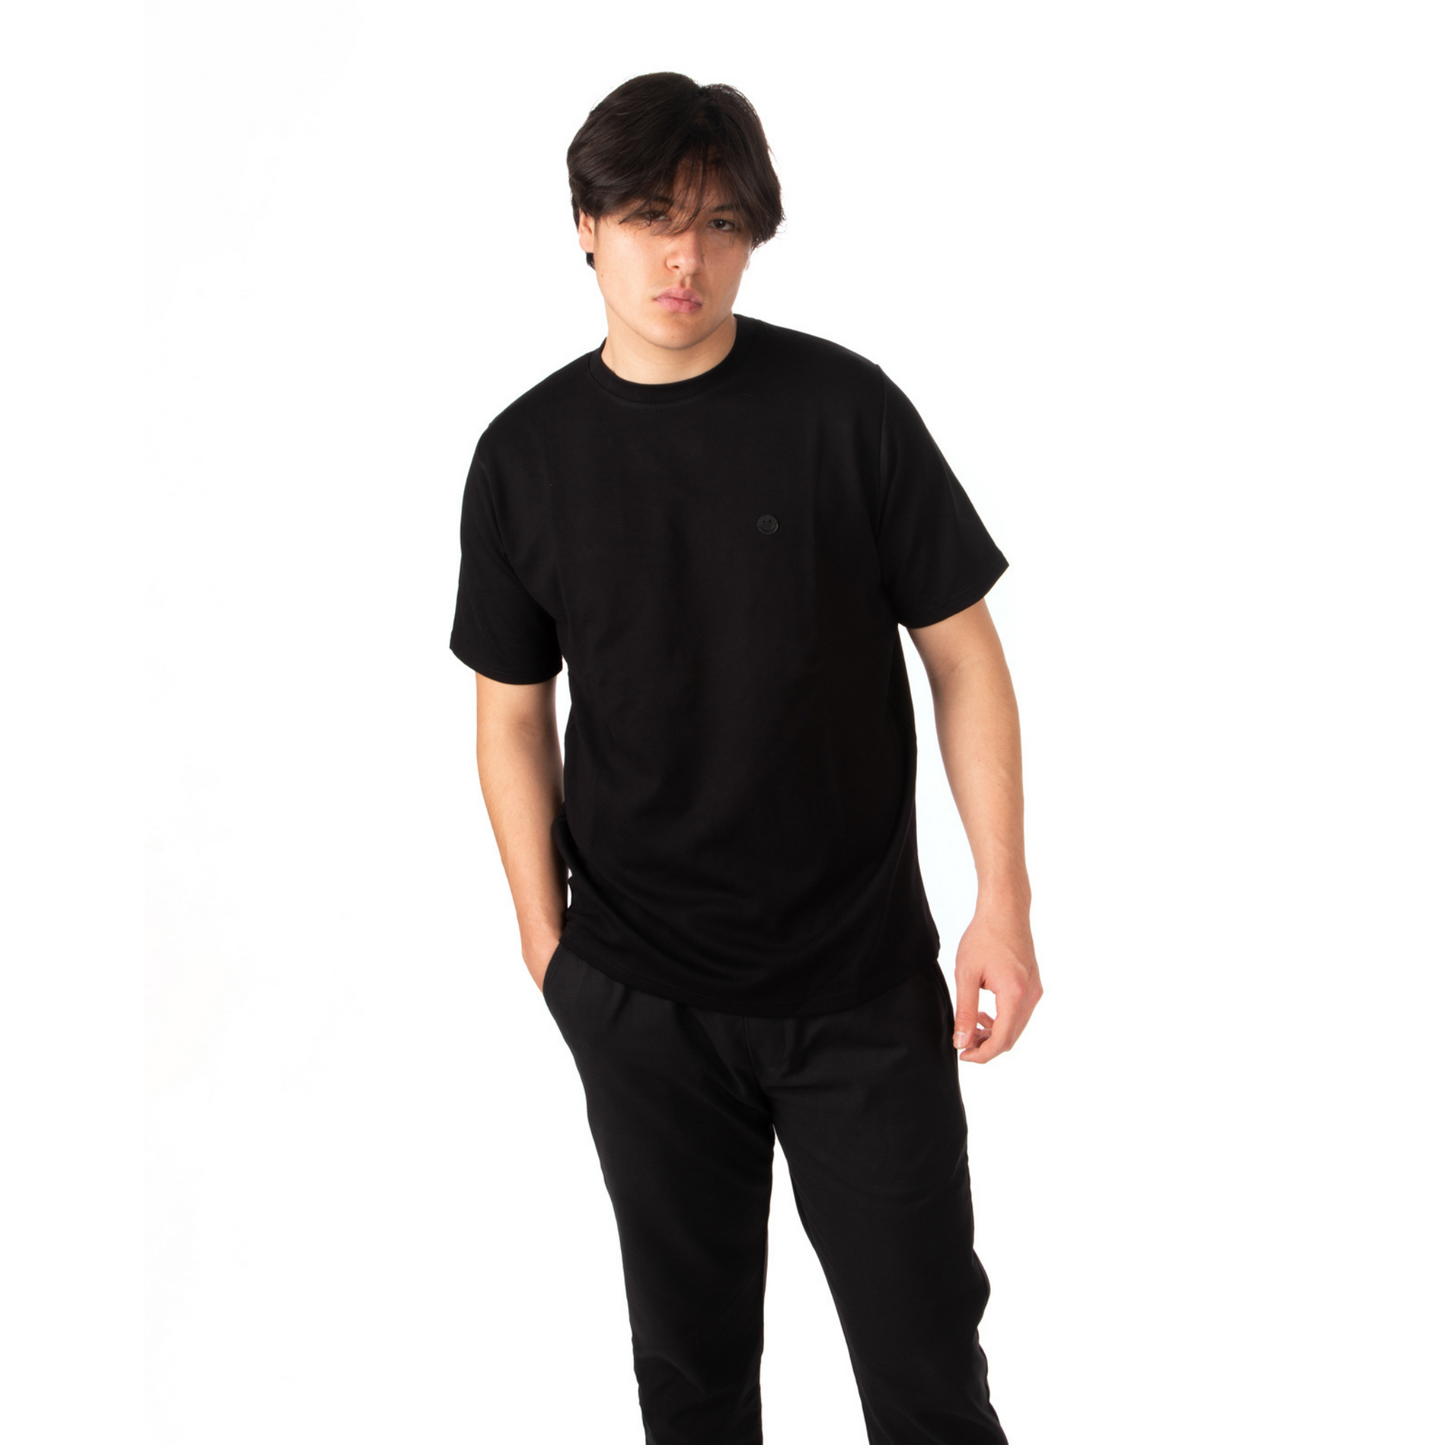 L’Homme Moderne Black T-shirt with Black Smiley zoomed view on male model